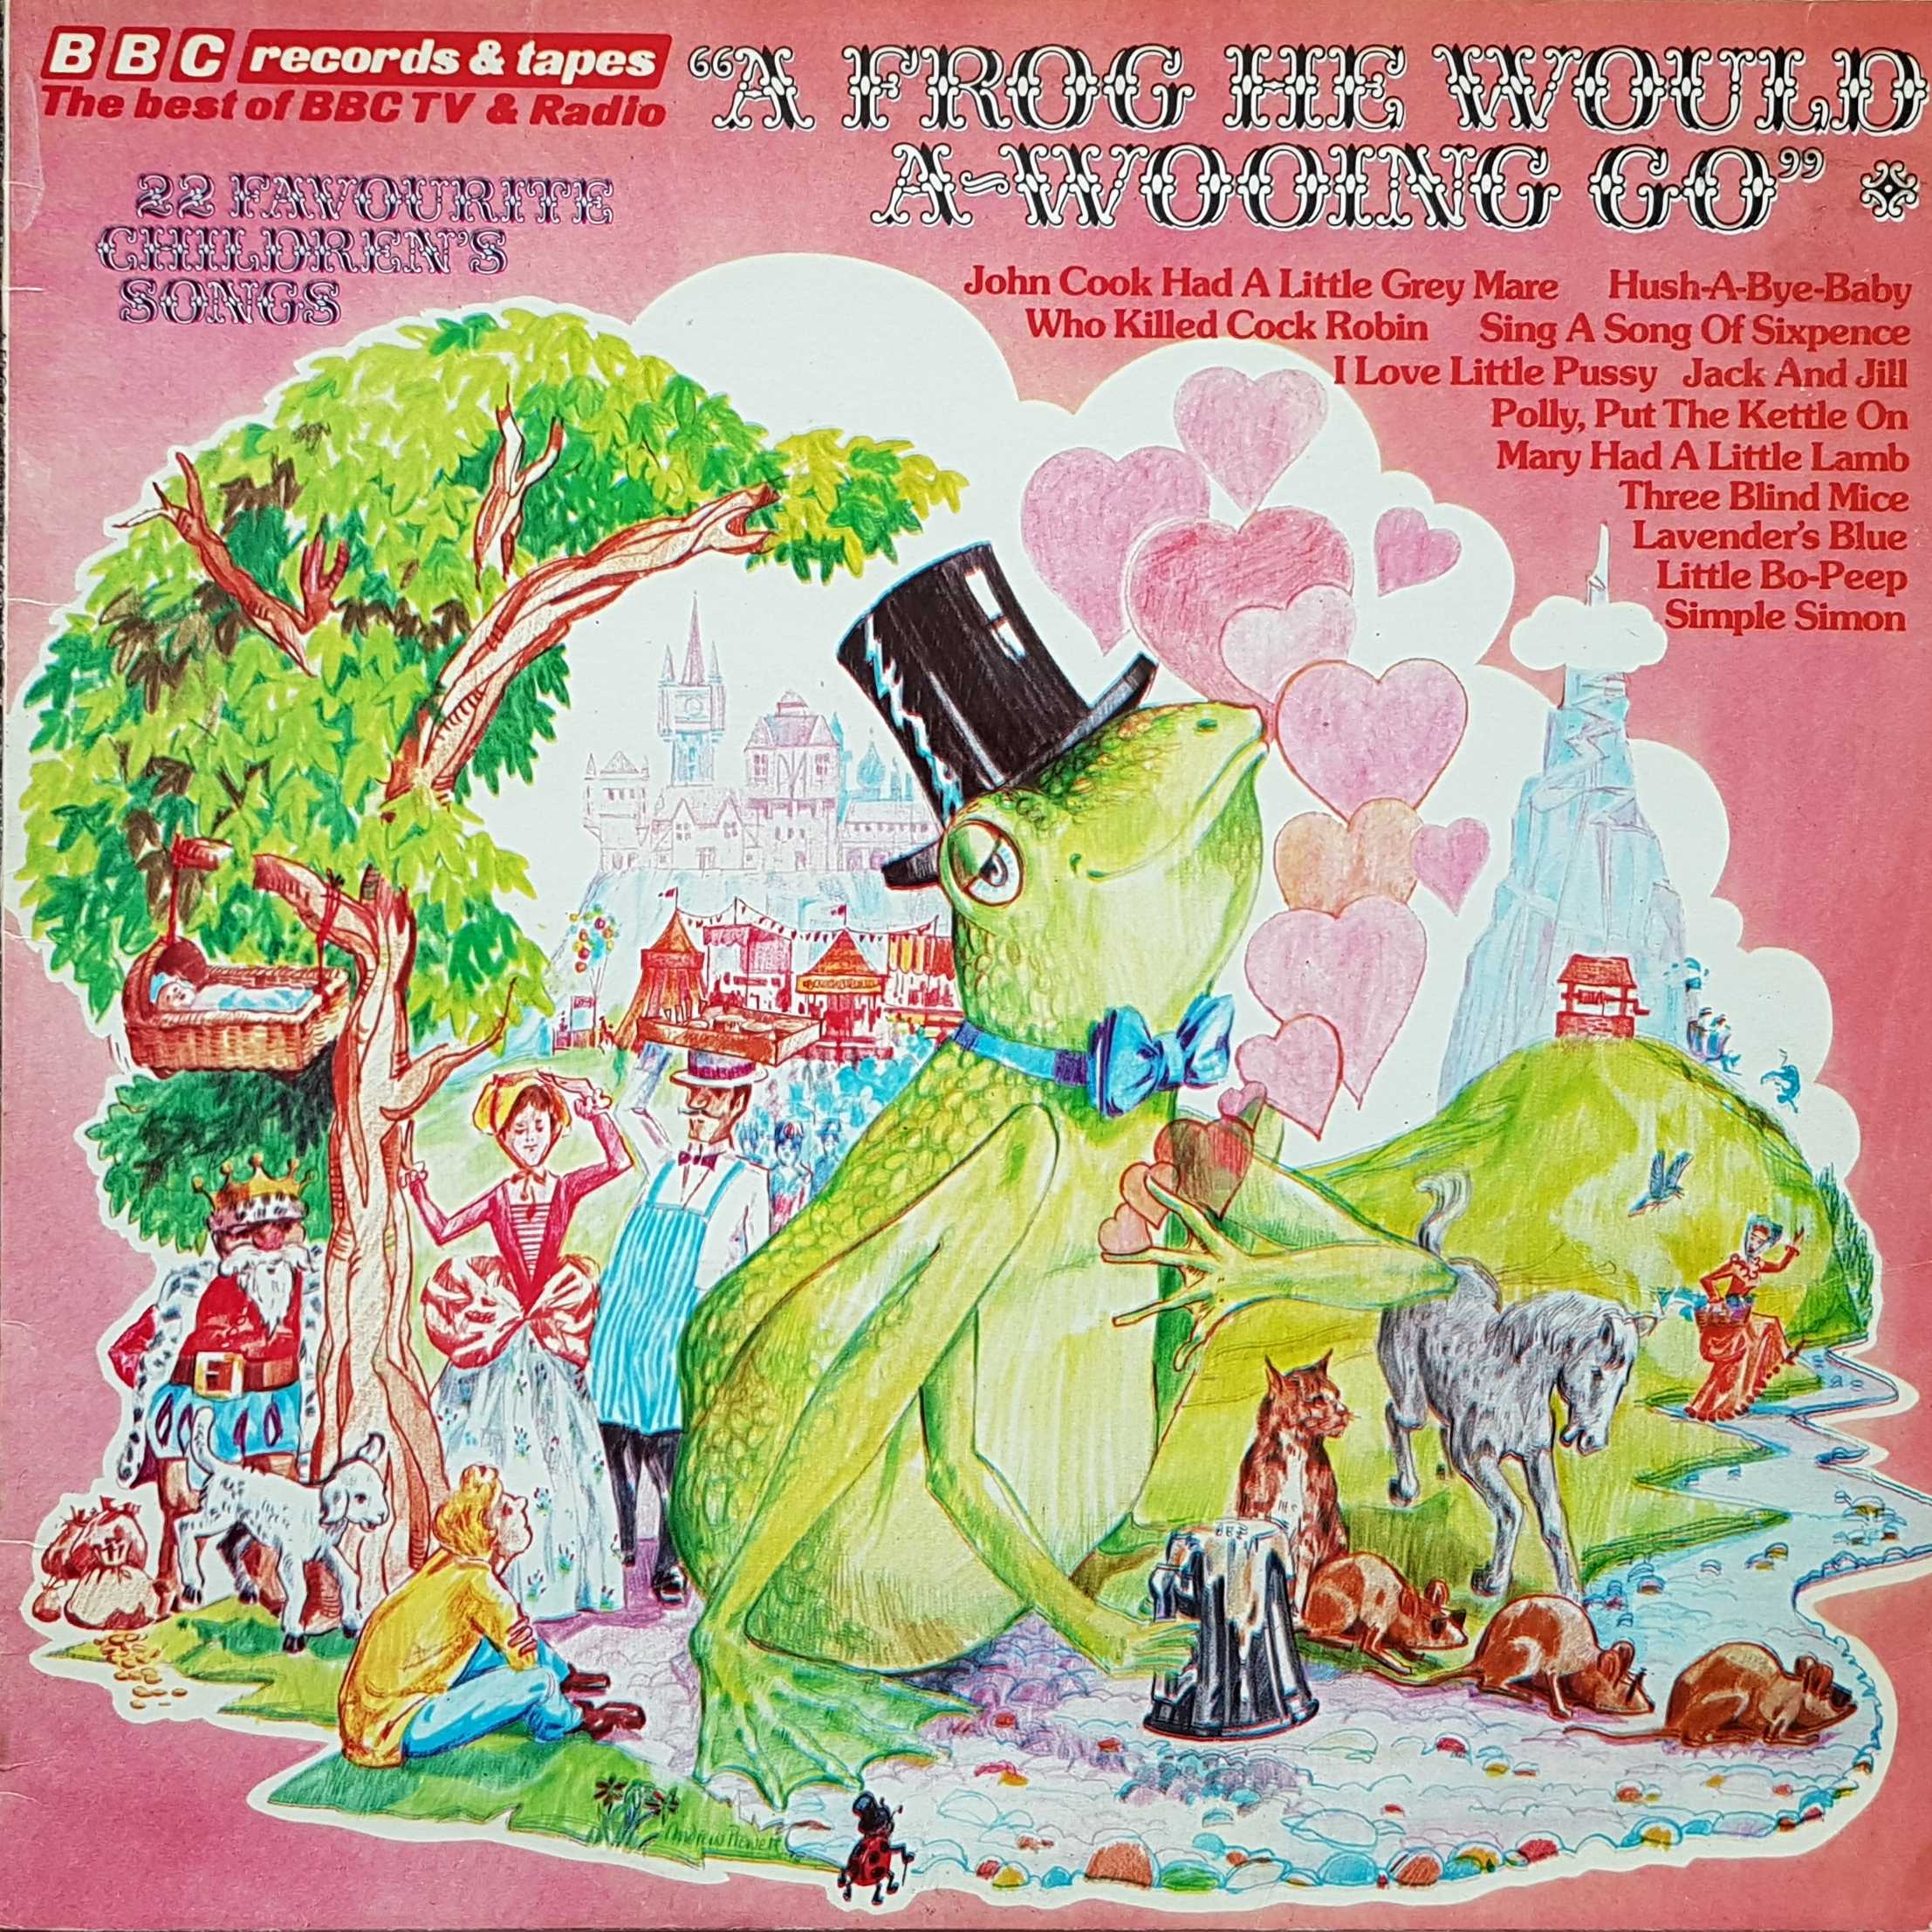 Picture of REC 224 A frog he would a wooing go and other stories by artist Various from the BBC albums - Records and Tapes library